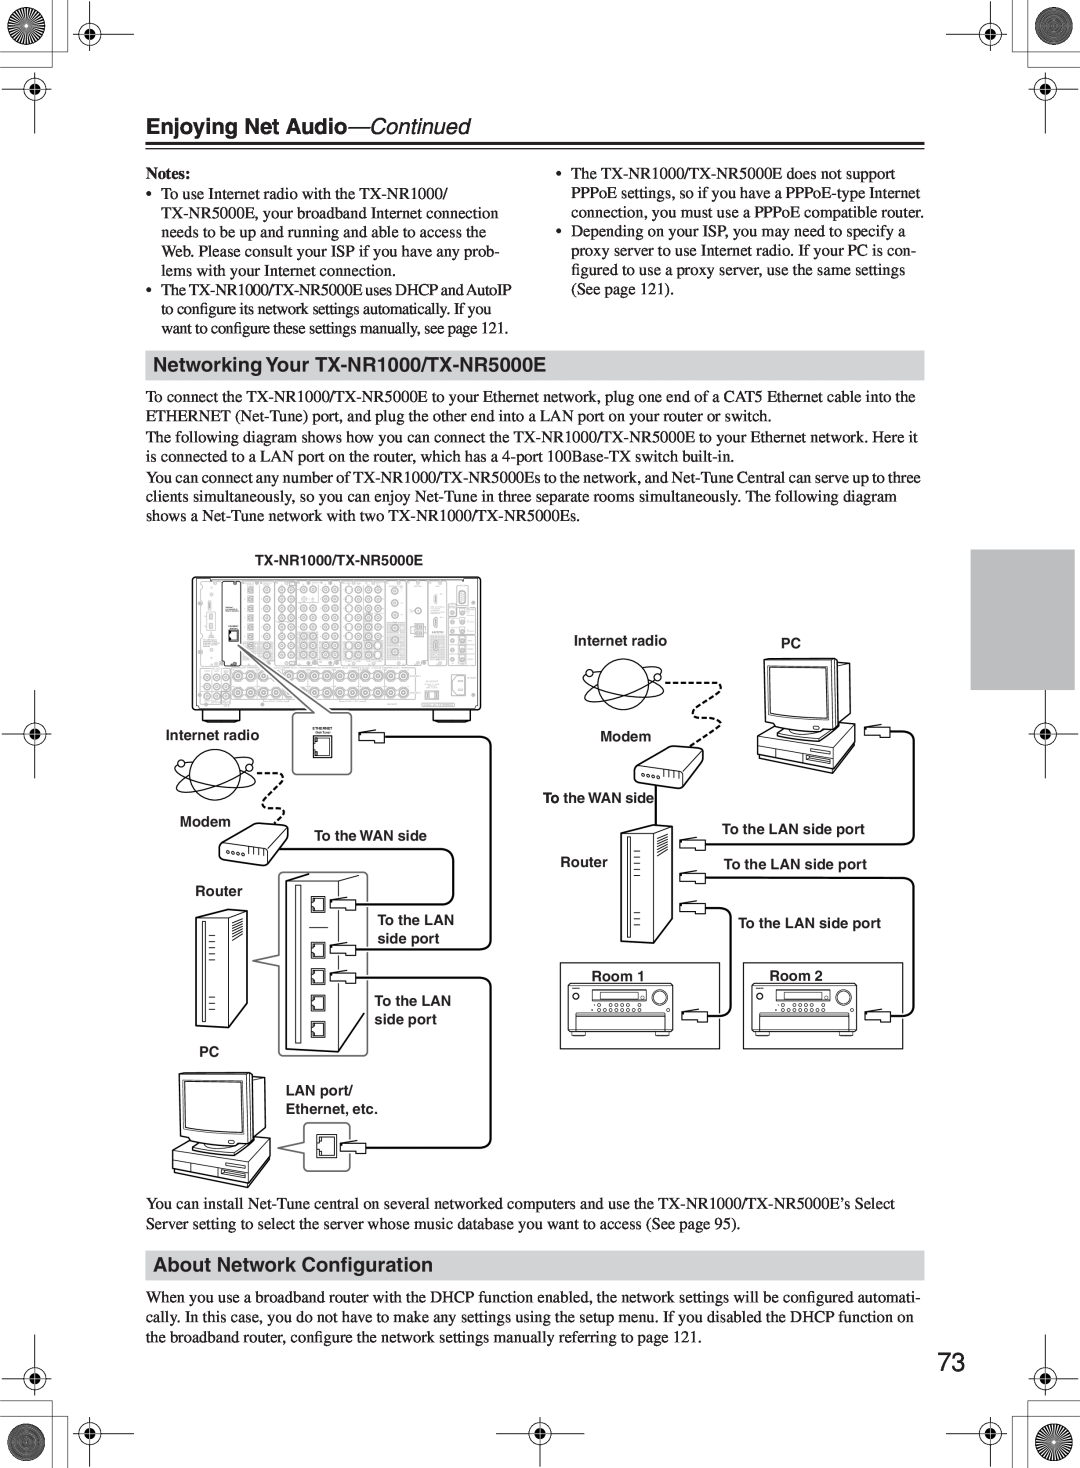 Onkyo Enjoying Net Audio-Continued, Networking Your TX-NR1000/TX-NR5000E, About Network Conﬁguration, Notes 